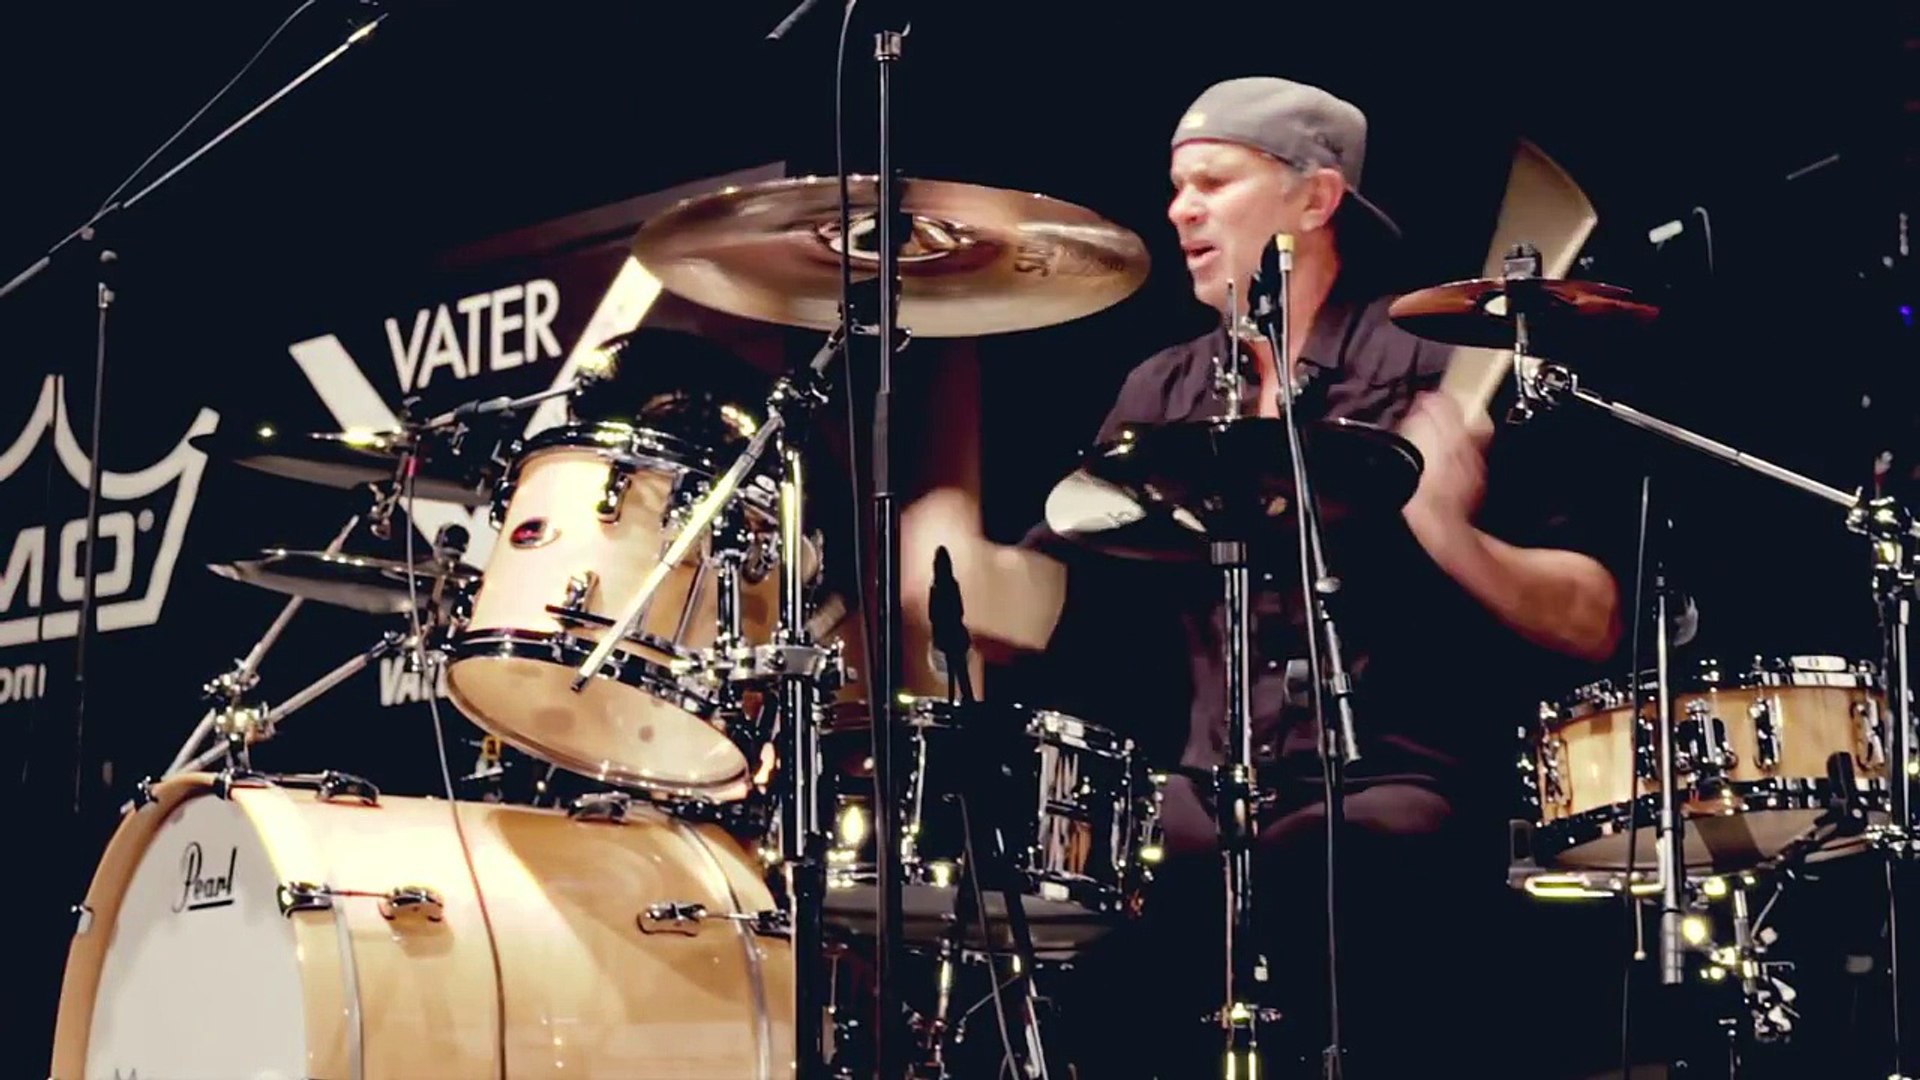 Red Hot Chili Peppers' Drummer Chad Smith Solo Excerpt From PASIC 2013